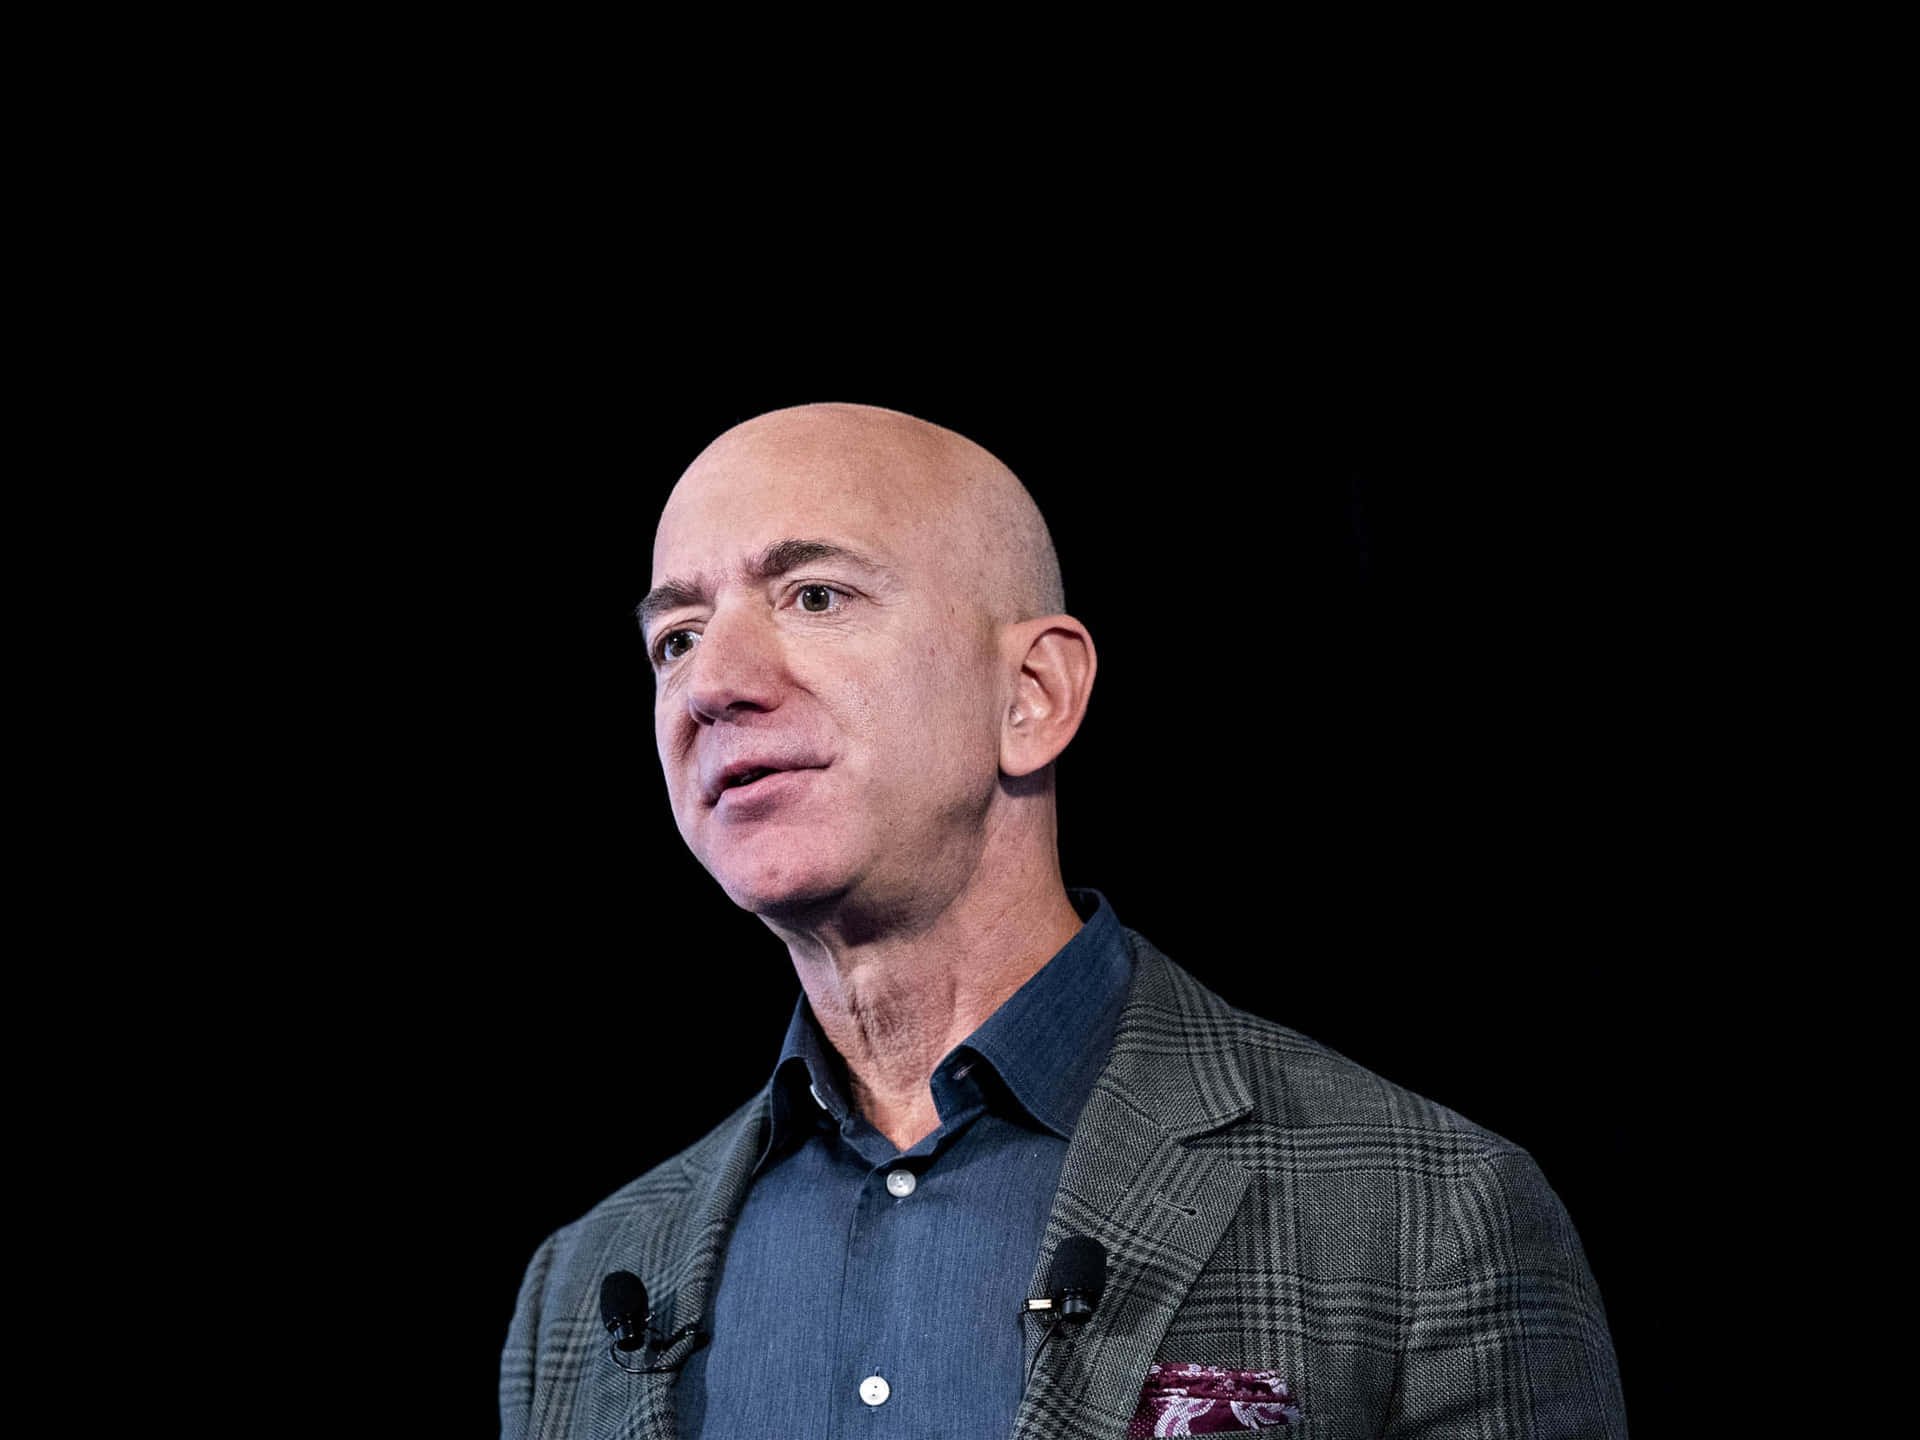 Jeff Bezos standing against an abstract background